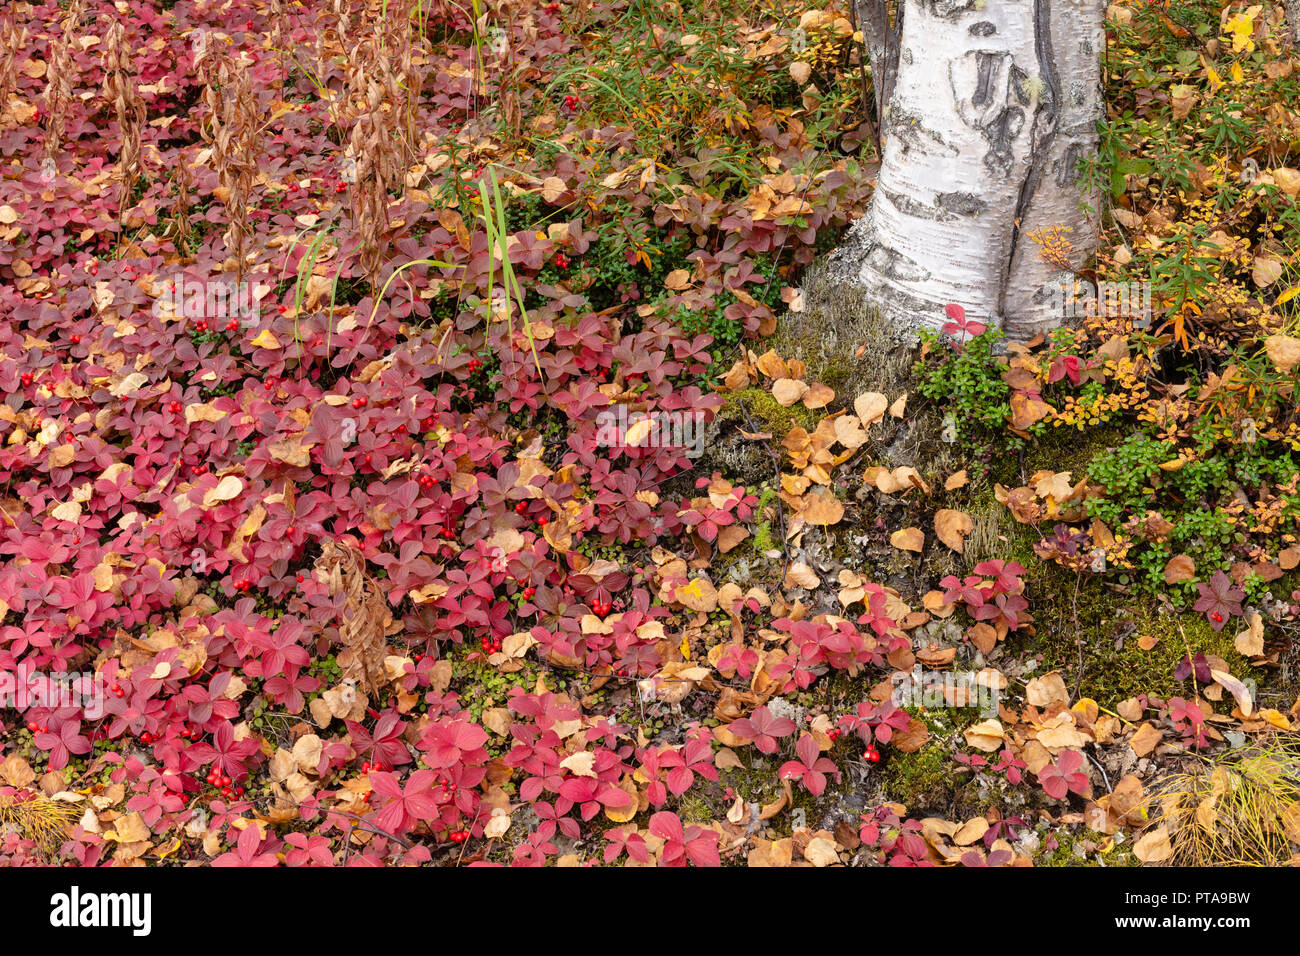 Dwarf Dogwood and Low-Bush Cranberry surround a birch tree trunk in late fall in Southcentral Alaska. Stock Photo